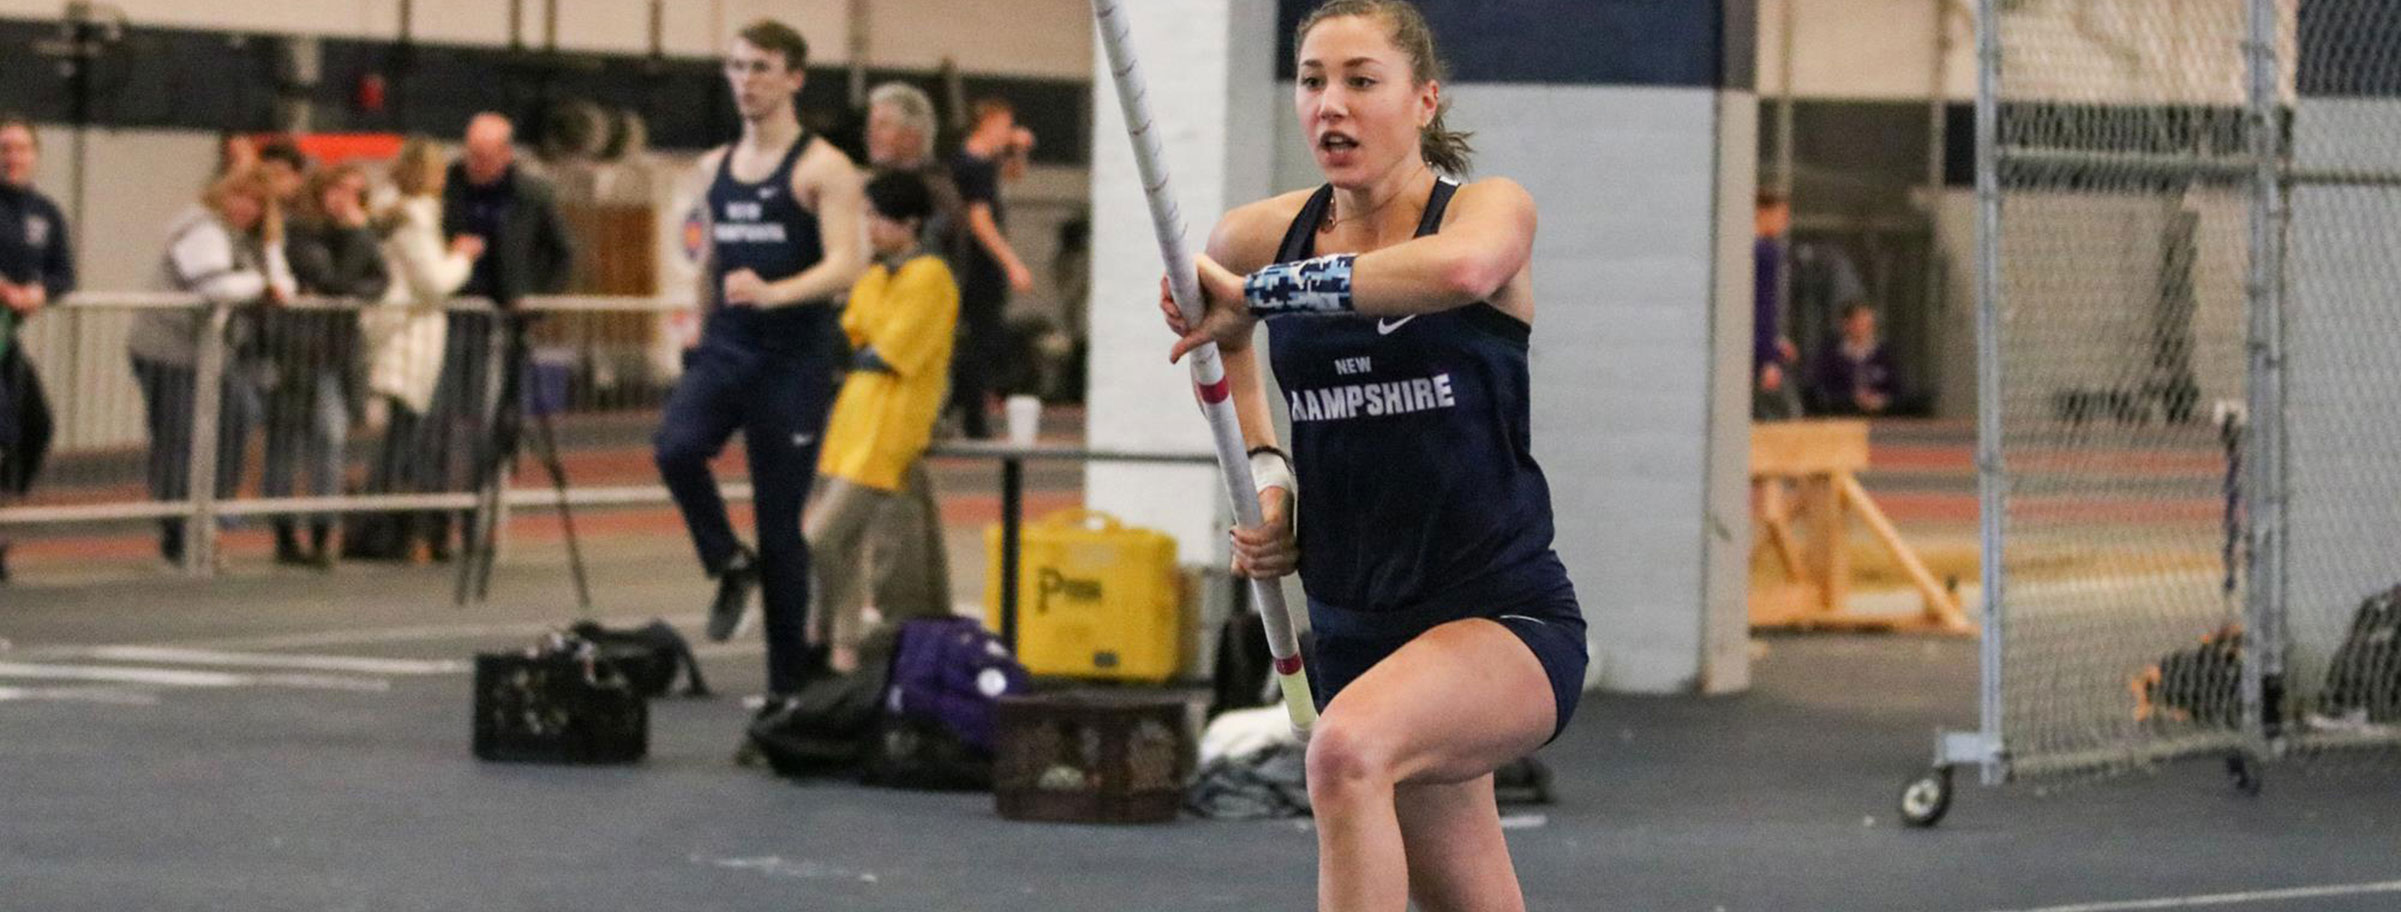 UNH indoor track female student running down track pole vault event